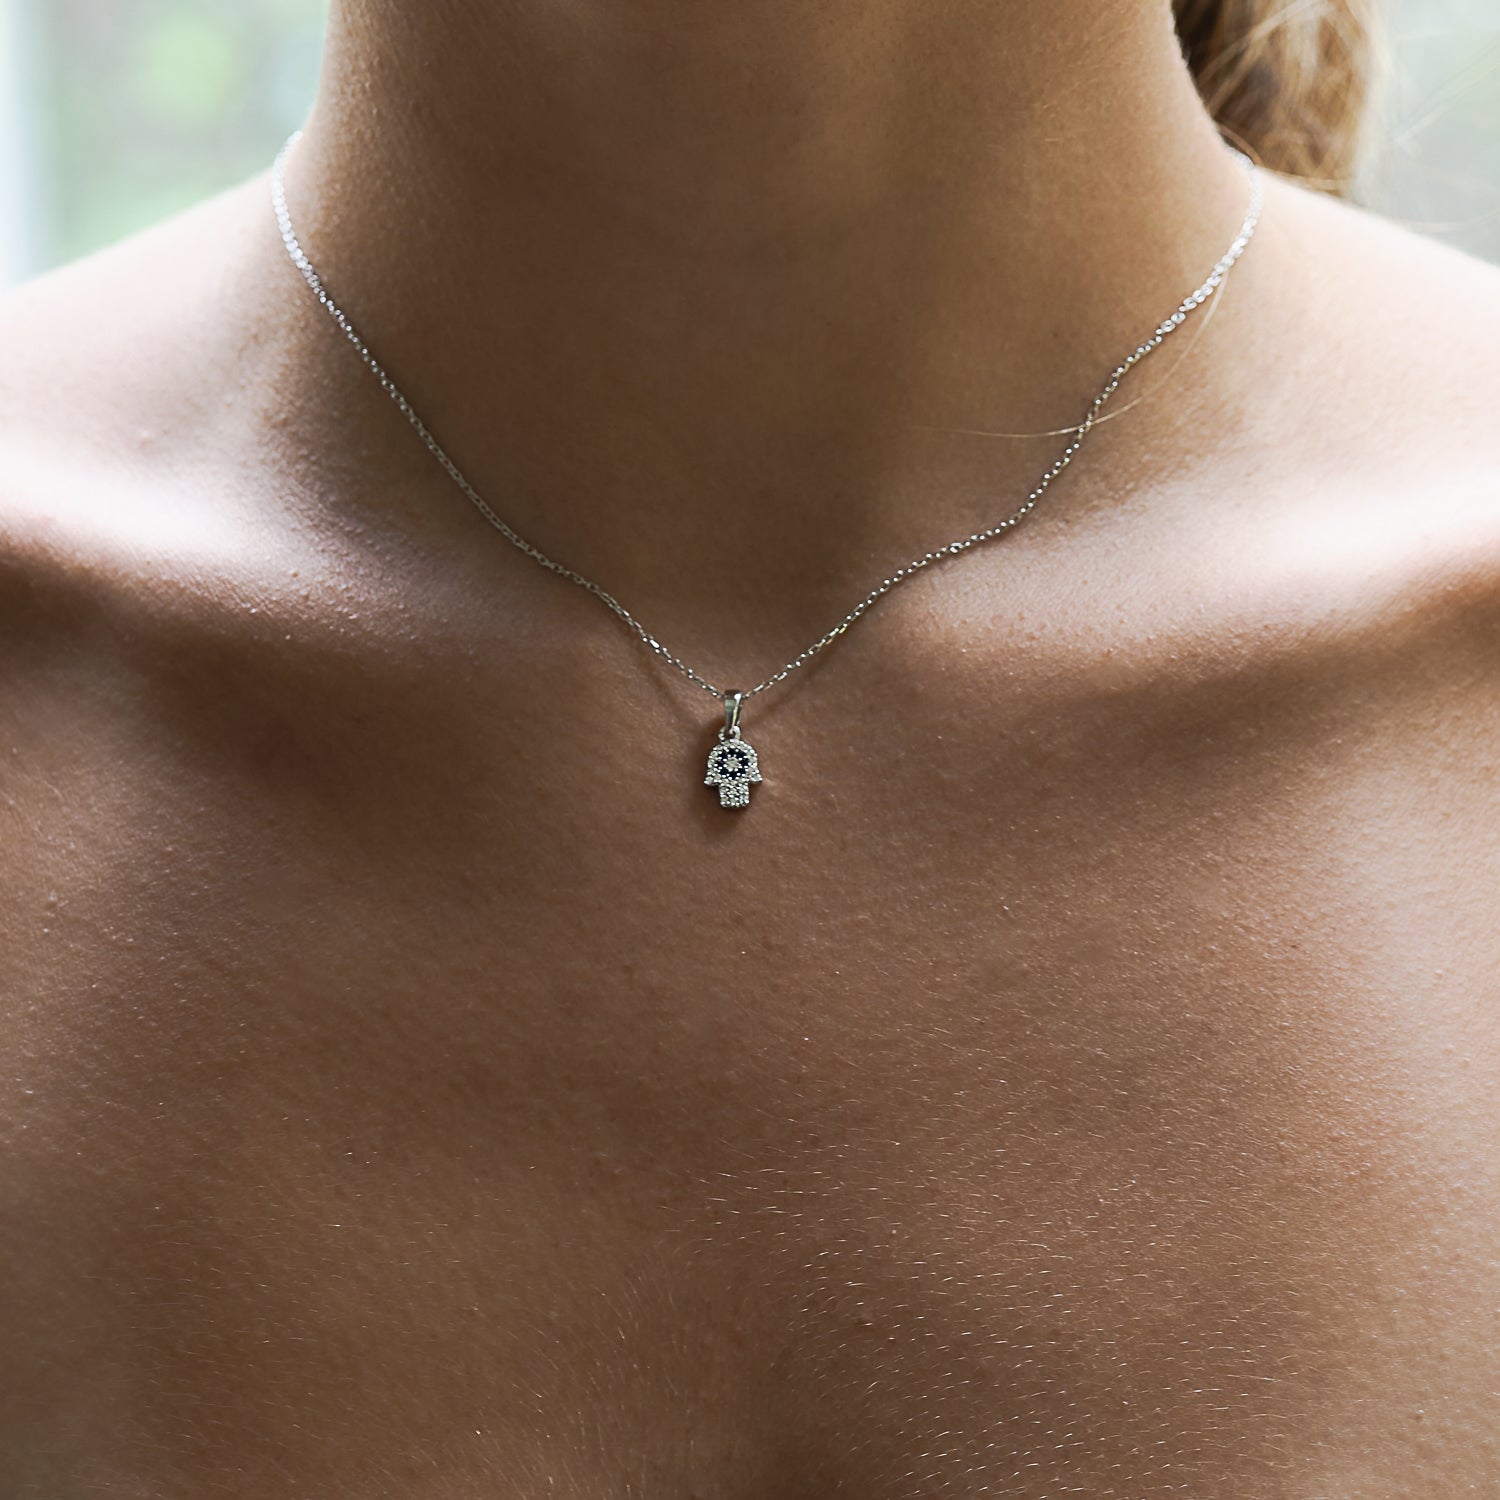 Hamsa Hand Necklace with Zircon Stones on a Graceful Model - Beauty and Meaning Combined.